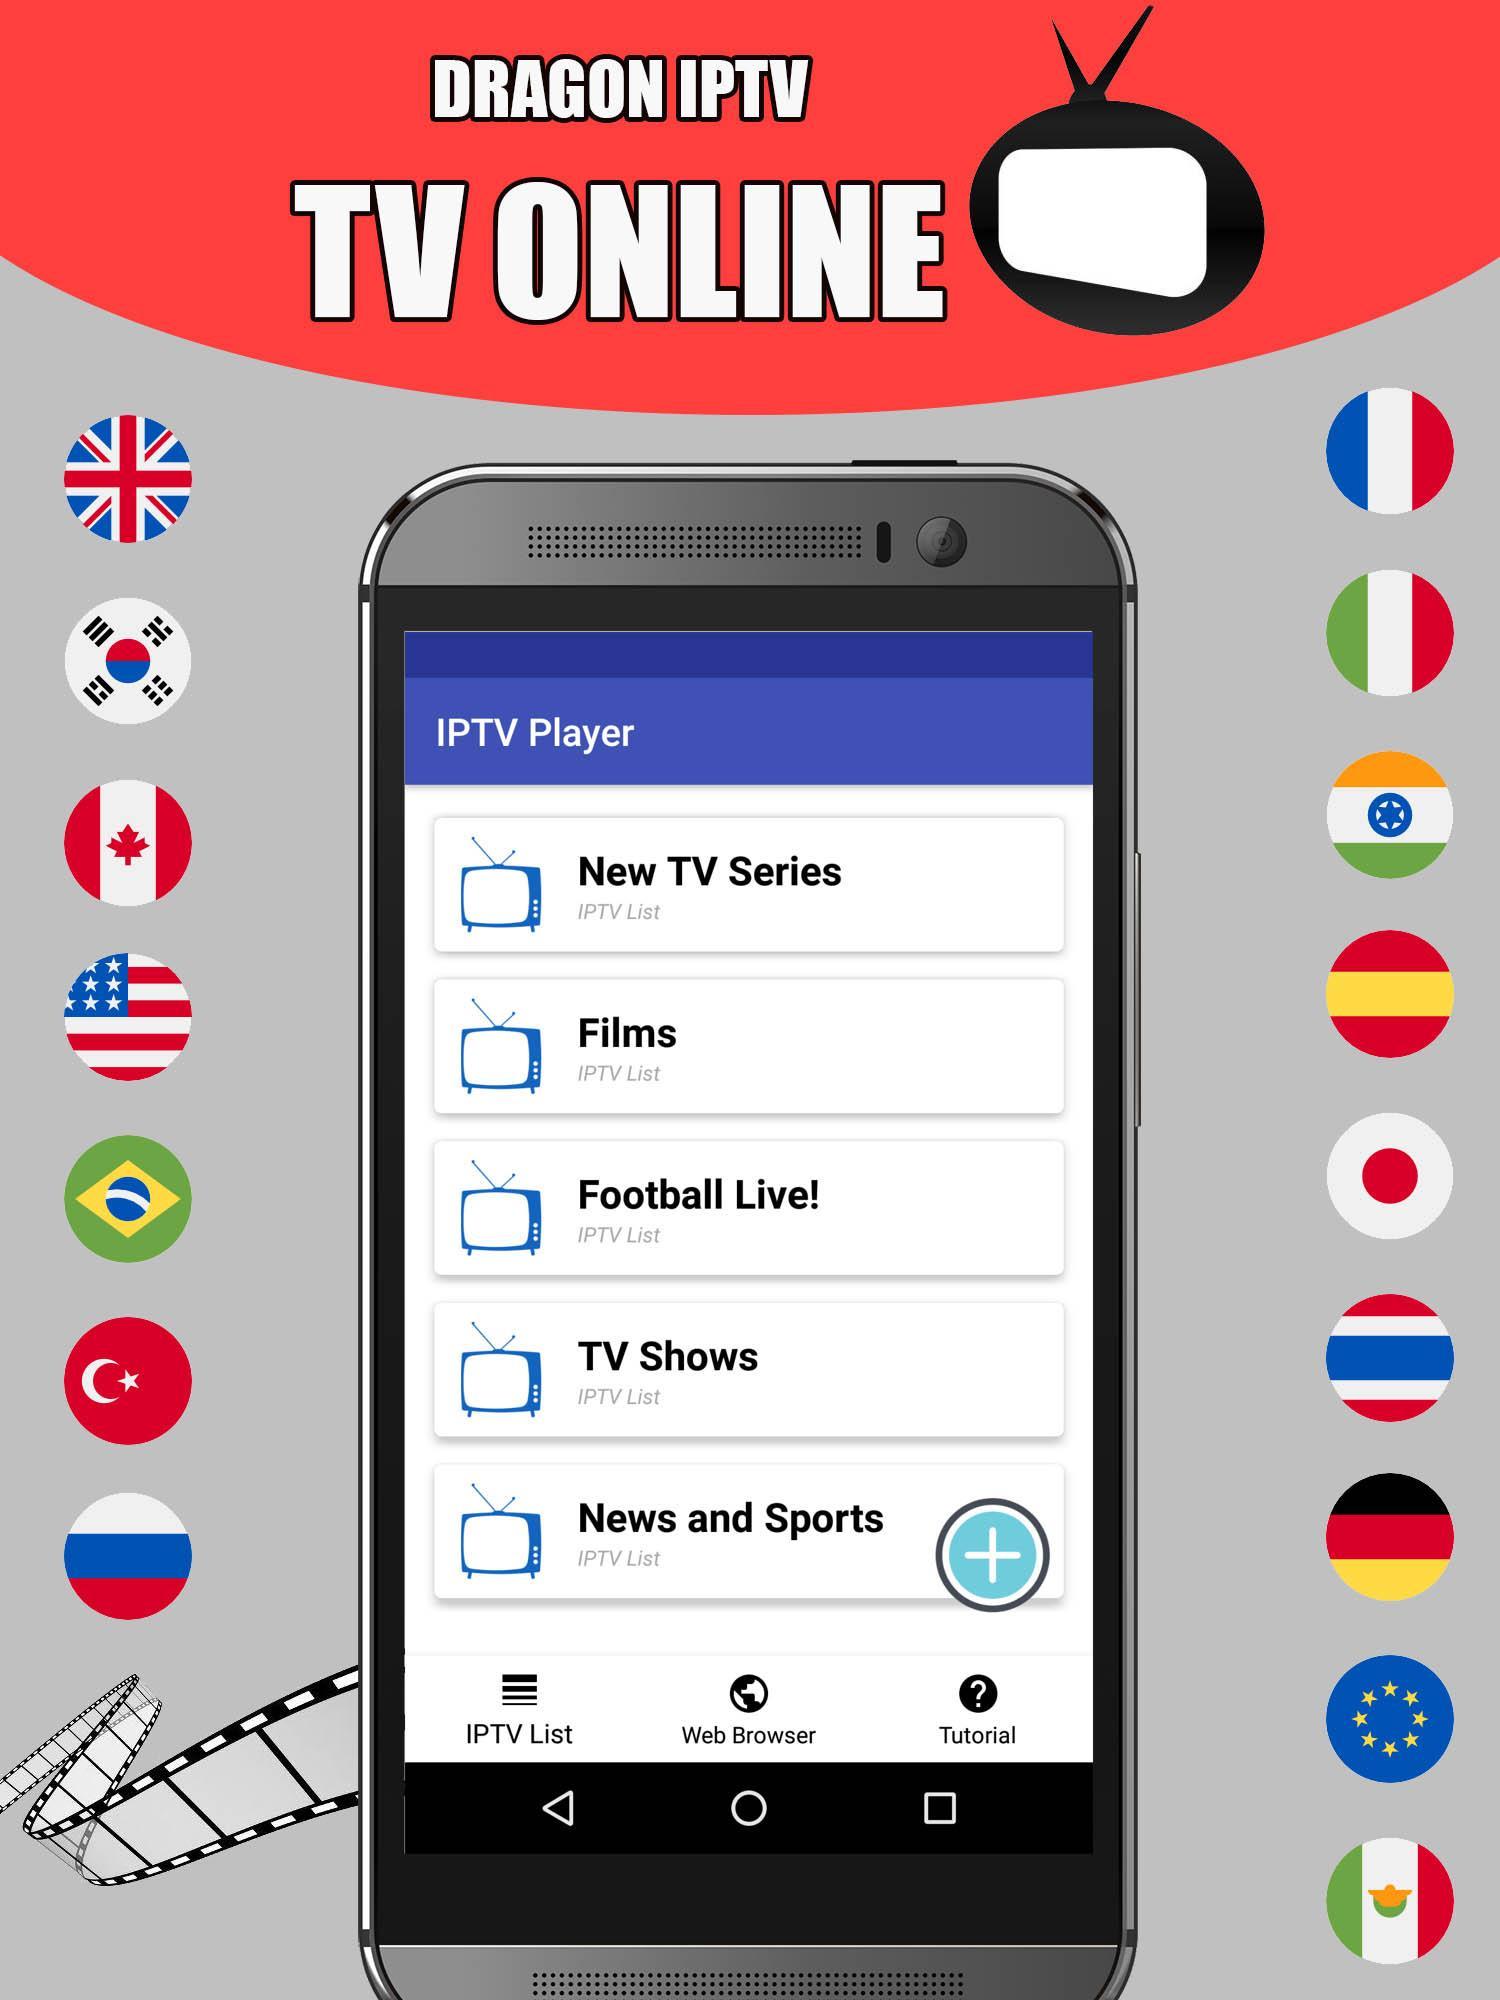 Dragon IPTV Watch TV Online for Android - APK Download